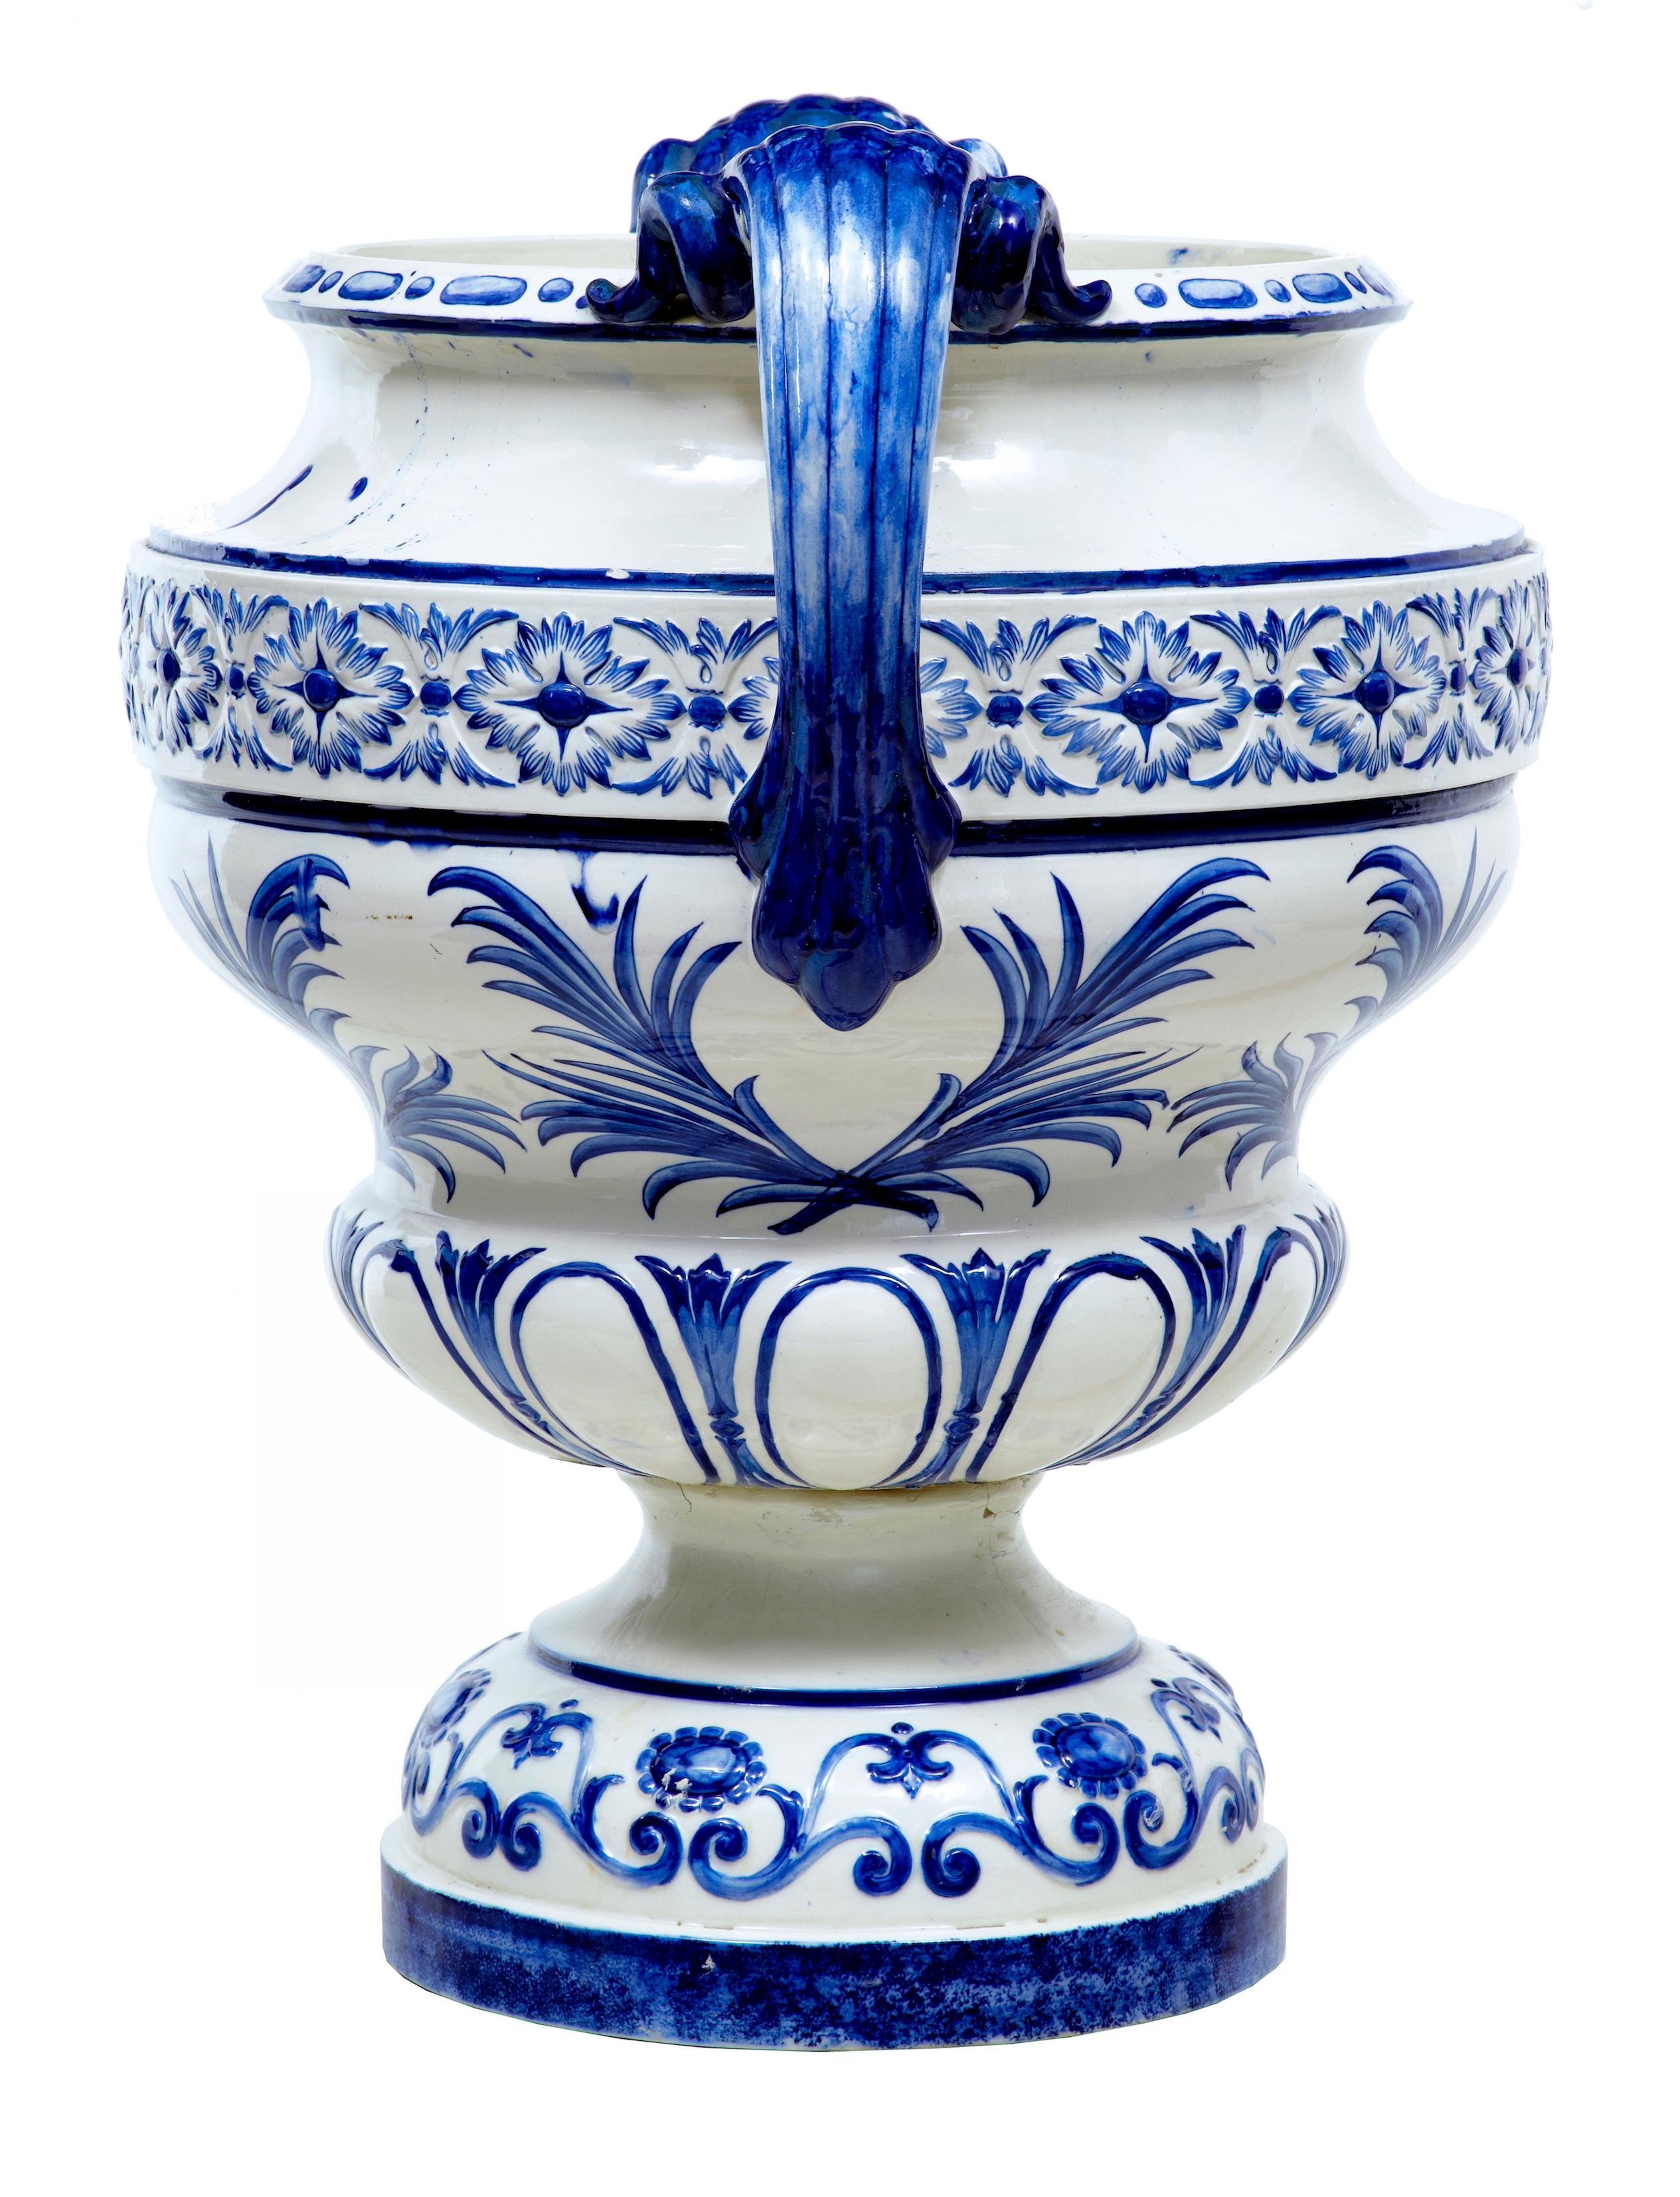 Early 20th century Swedish ceramic urn by rorstrand circa 1901.

Large blue and white urn by the reknowned maker rorstrand stamped 1901. Rorstrand are a swedish company that have been making fine quality porcelain and pottery since 1726 and still